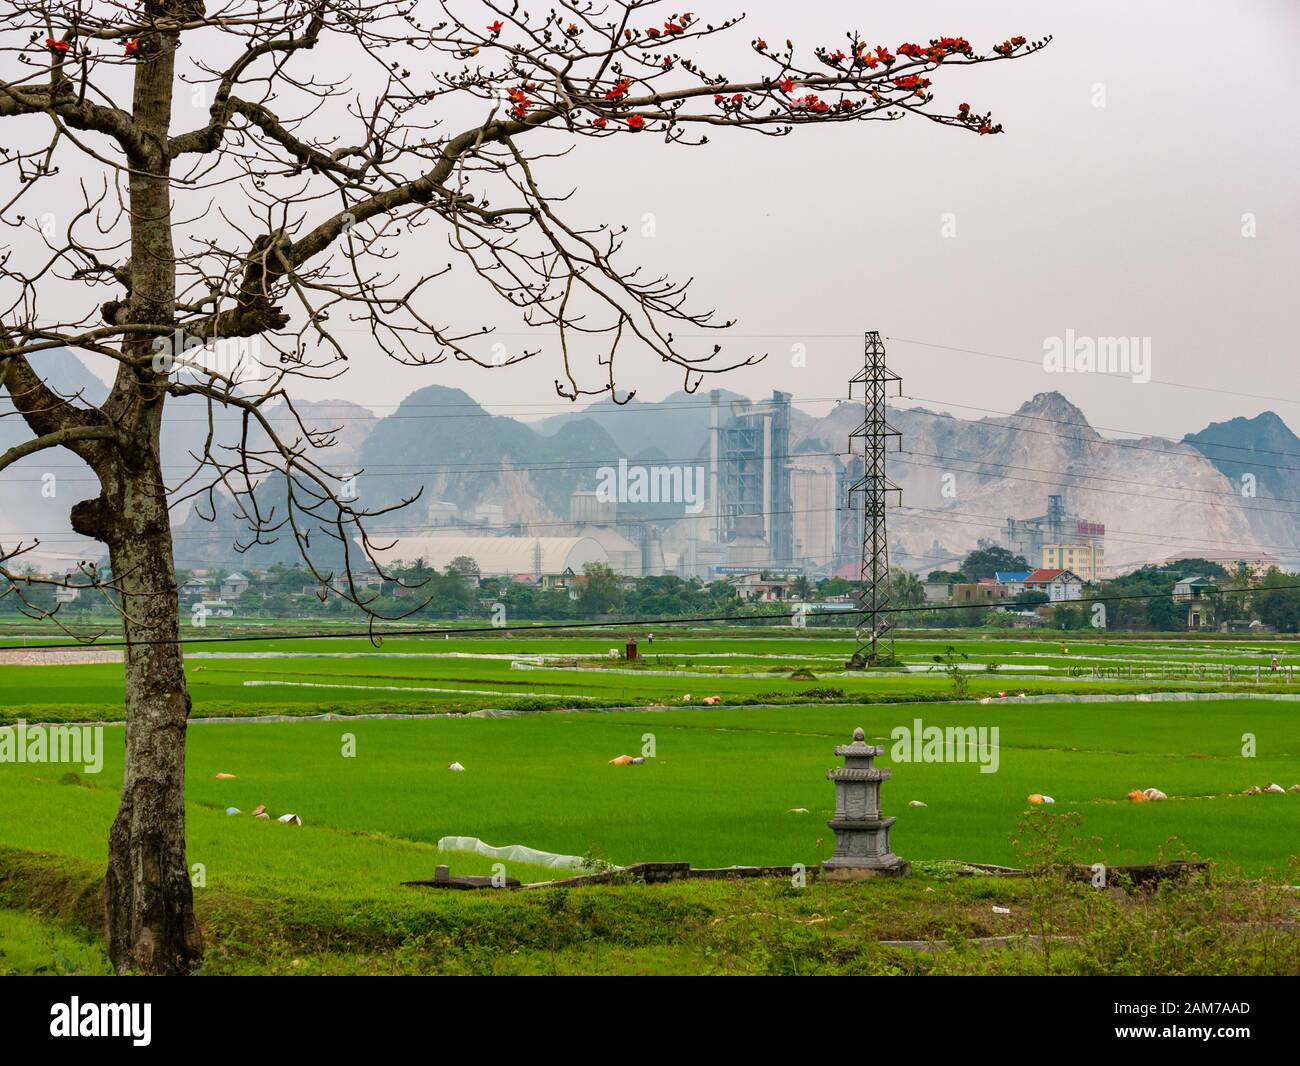 Industrial limestone quarry with rice paddy fields and ancestral graves, Ninh Binh, Vietnam, Asia Stock Photo